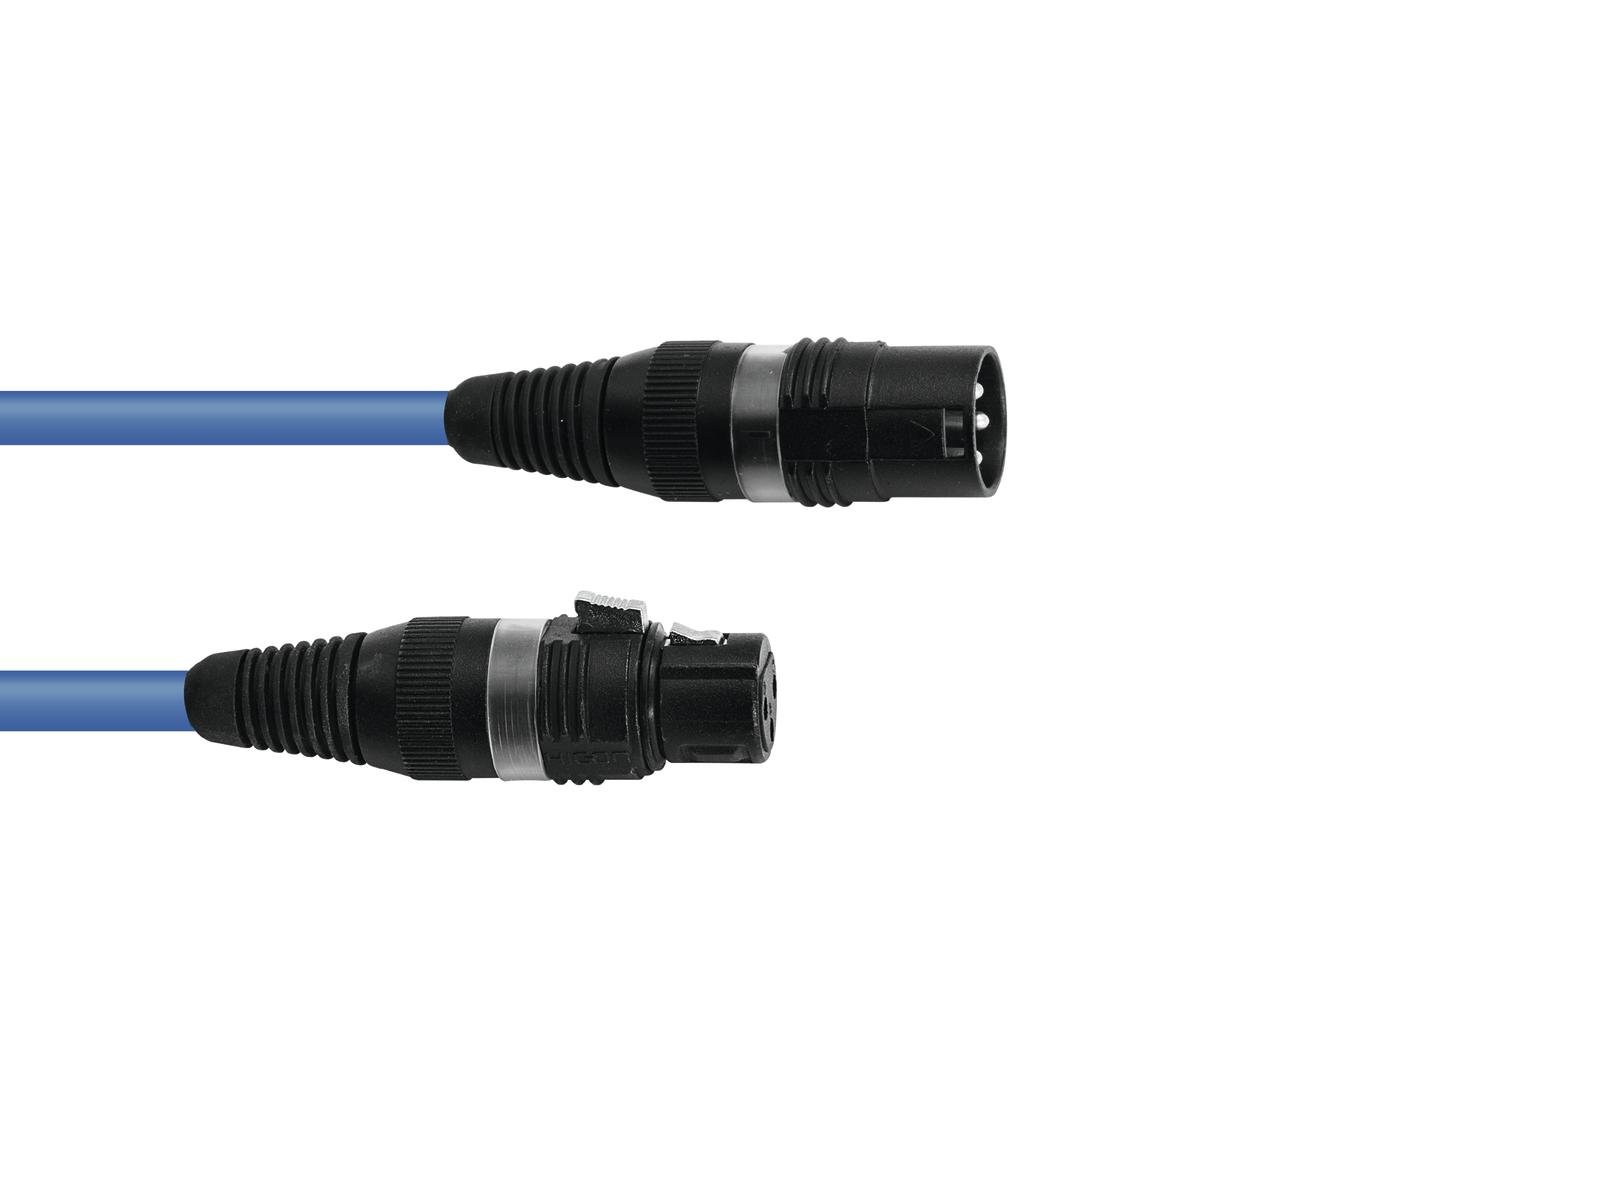 SOMMER CABLE DMX cable XLR 3pin 3m bu Hicon